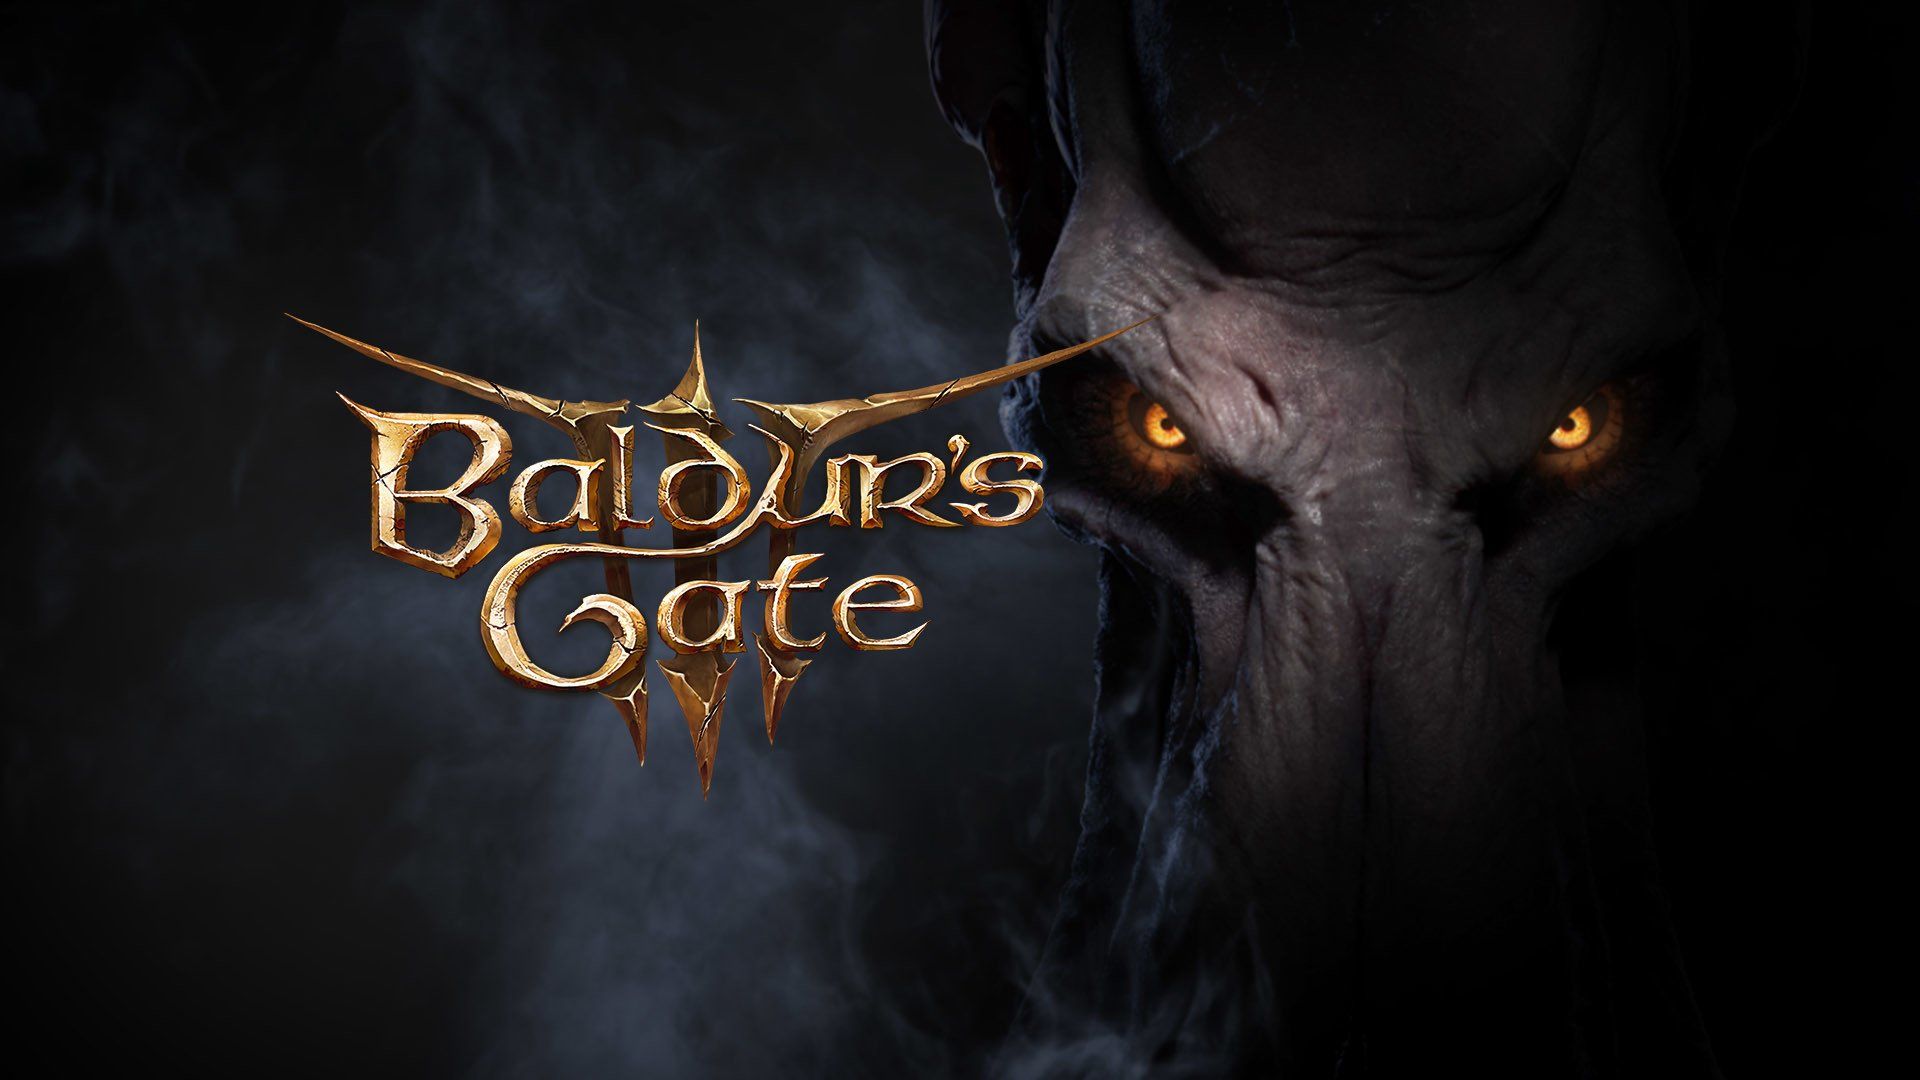 Baldur's Gate III Early Access Pushed To October, PC Requirements Revealed